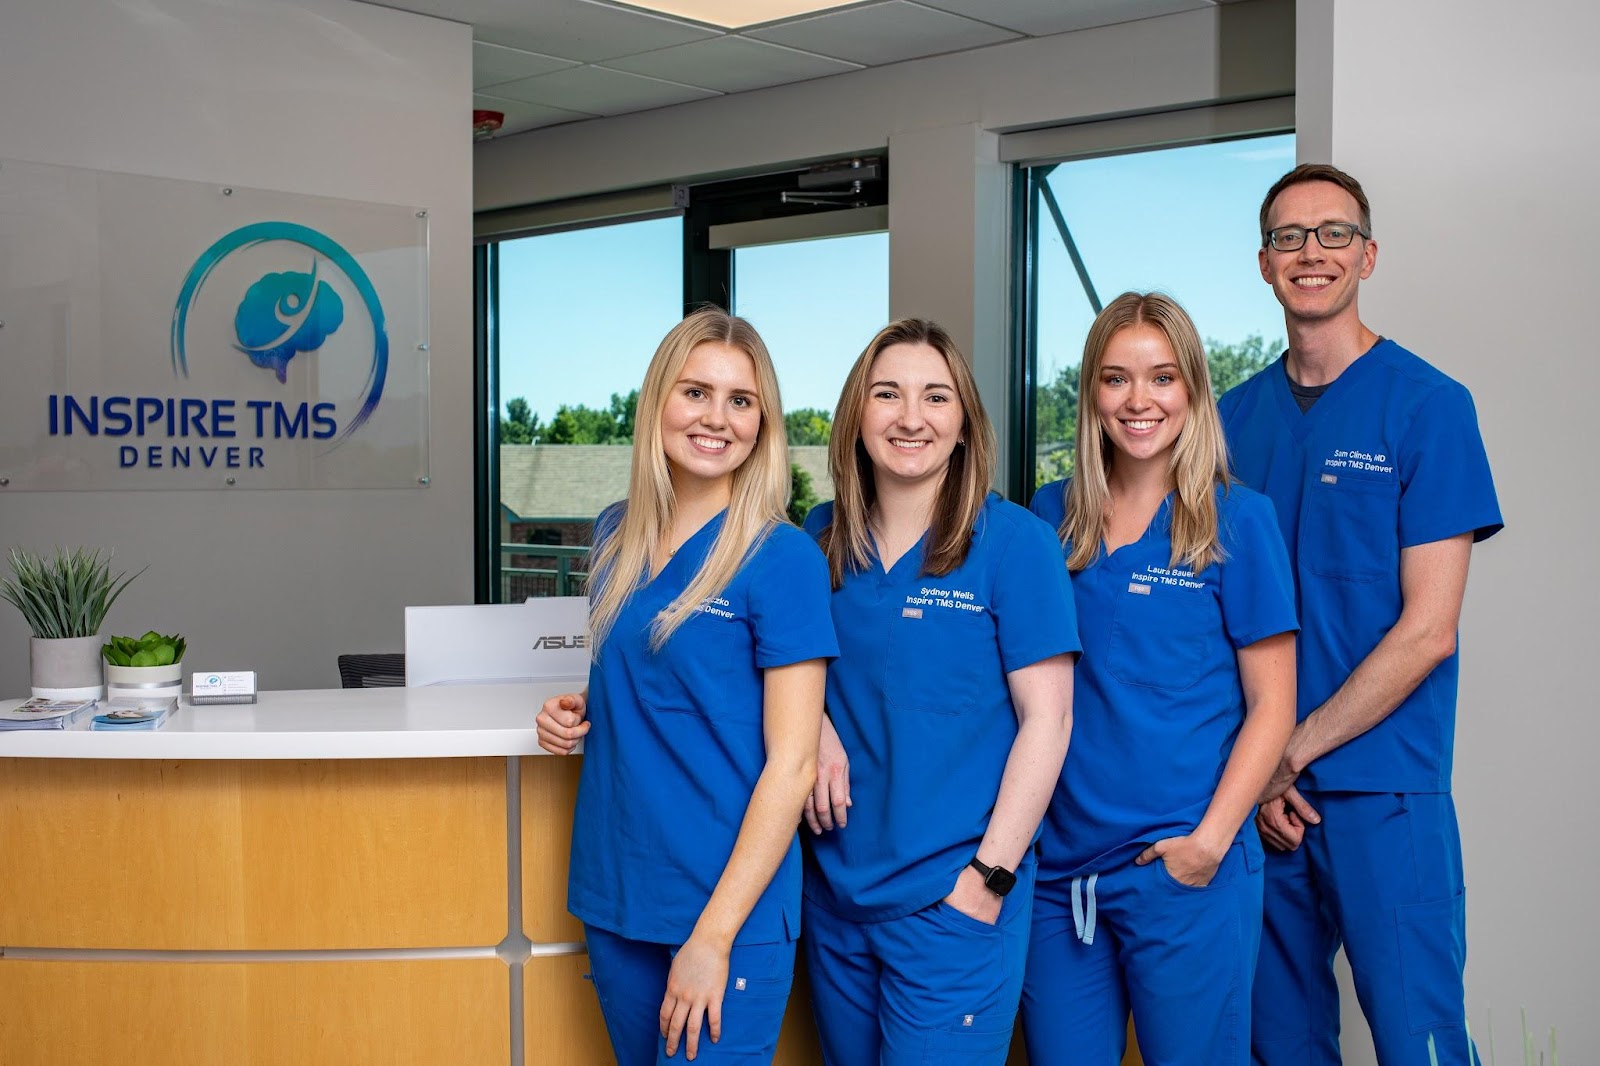 Inspire TMS Denver is a psychiatric clinic specializing in TMS therapy, including TMS for depression, TMS therapy for obsessive-compulsive disorder, advanced theta-burst stimulation, accelerated TMS therapy, and other TMS protocols treating PTSD, Bipolar disorder, and Anxiety disorders.